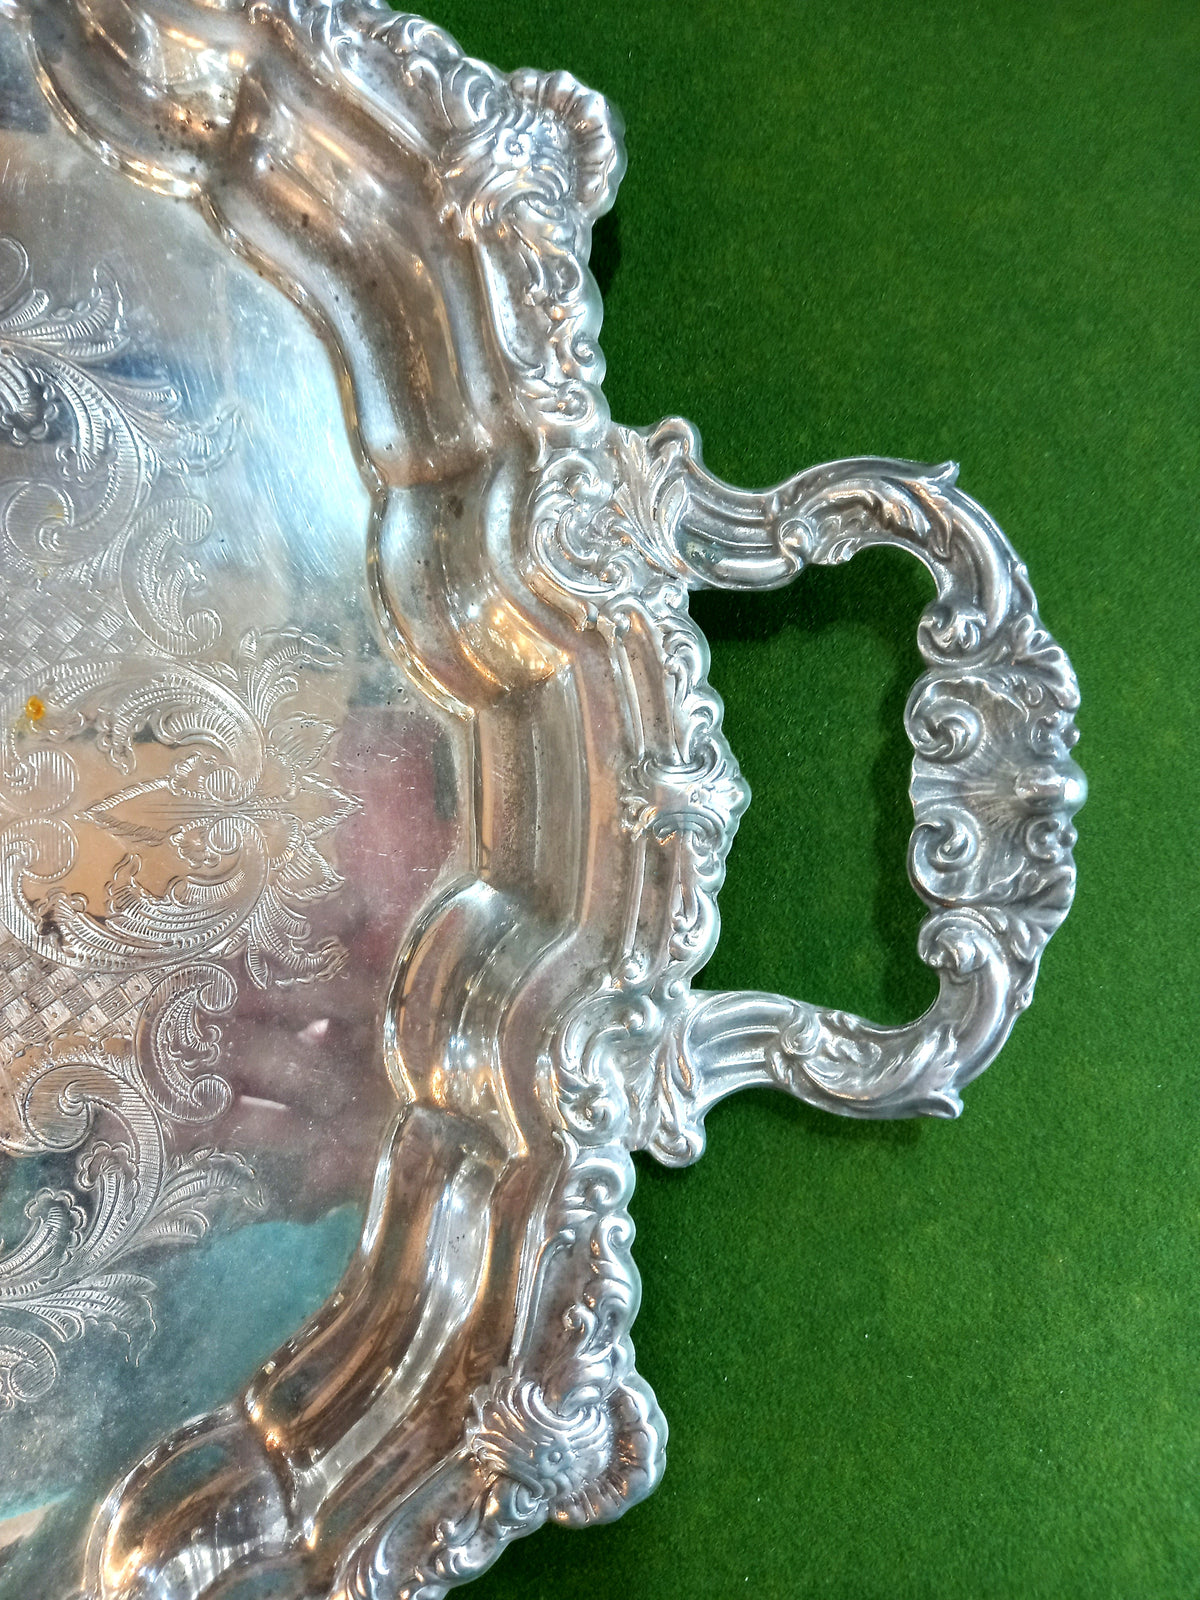 Decorative Tray with Handles